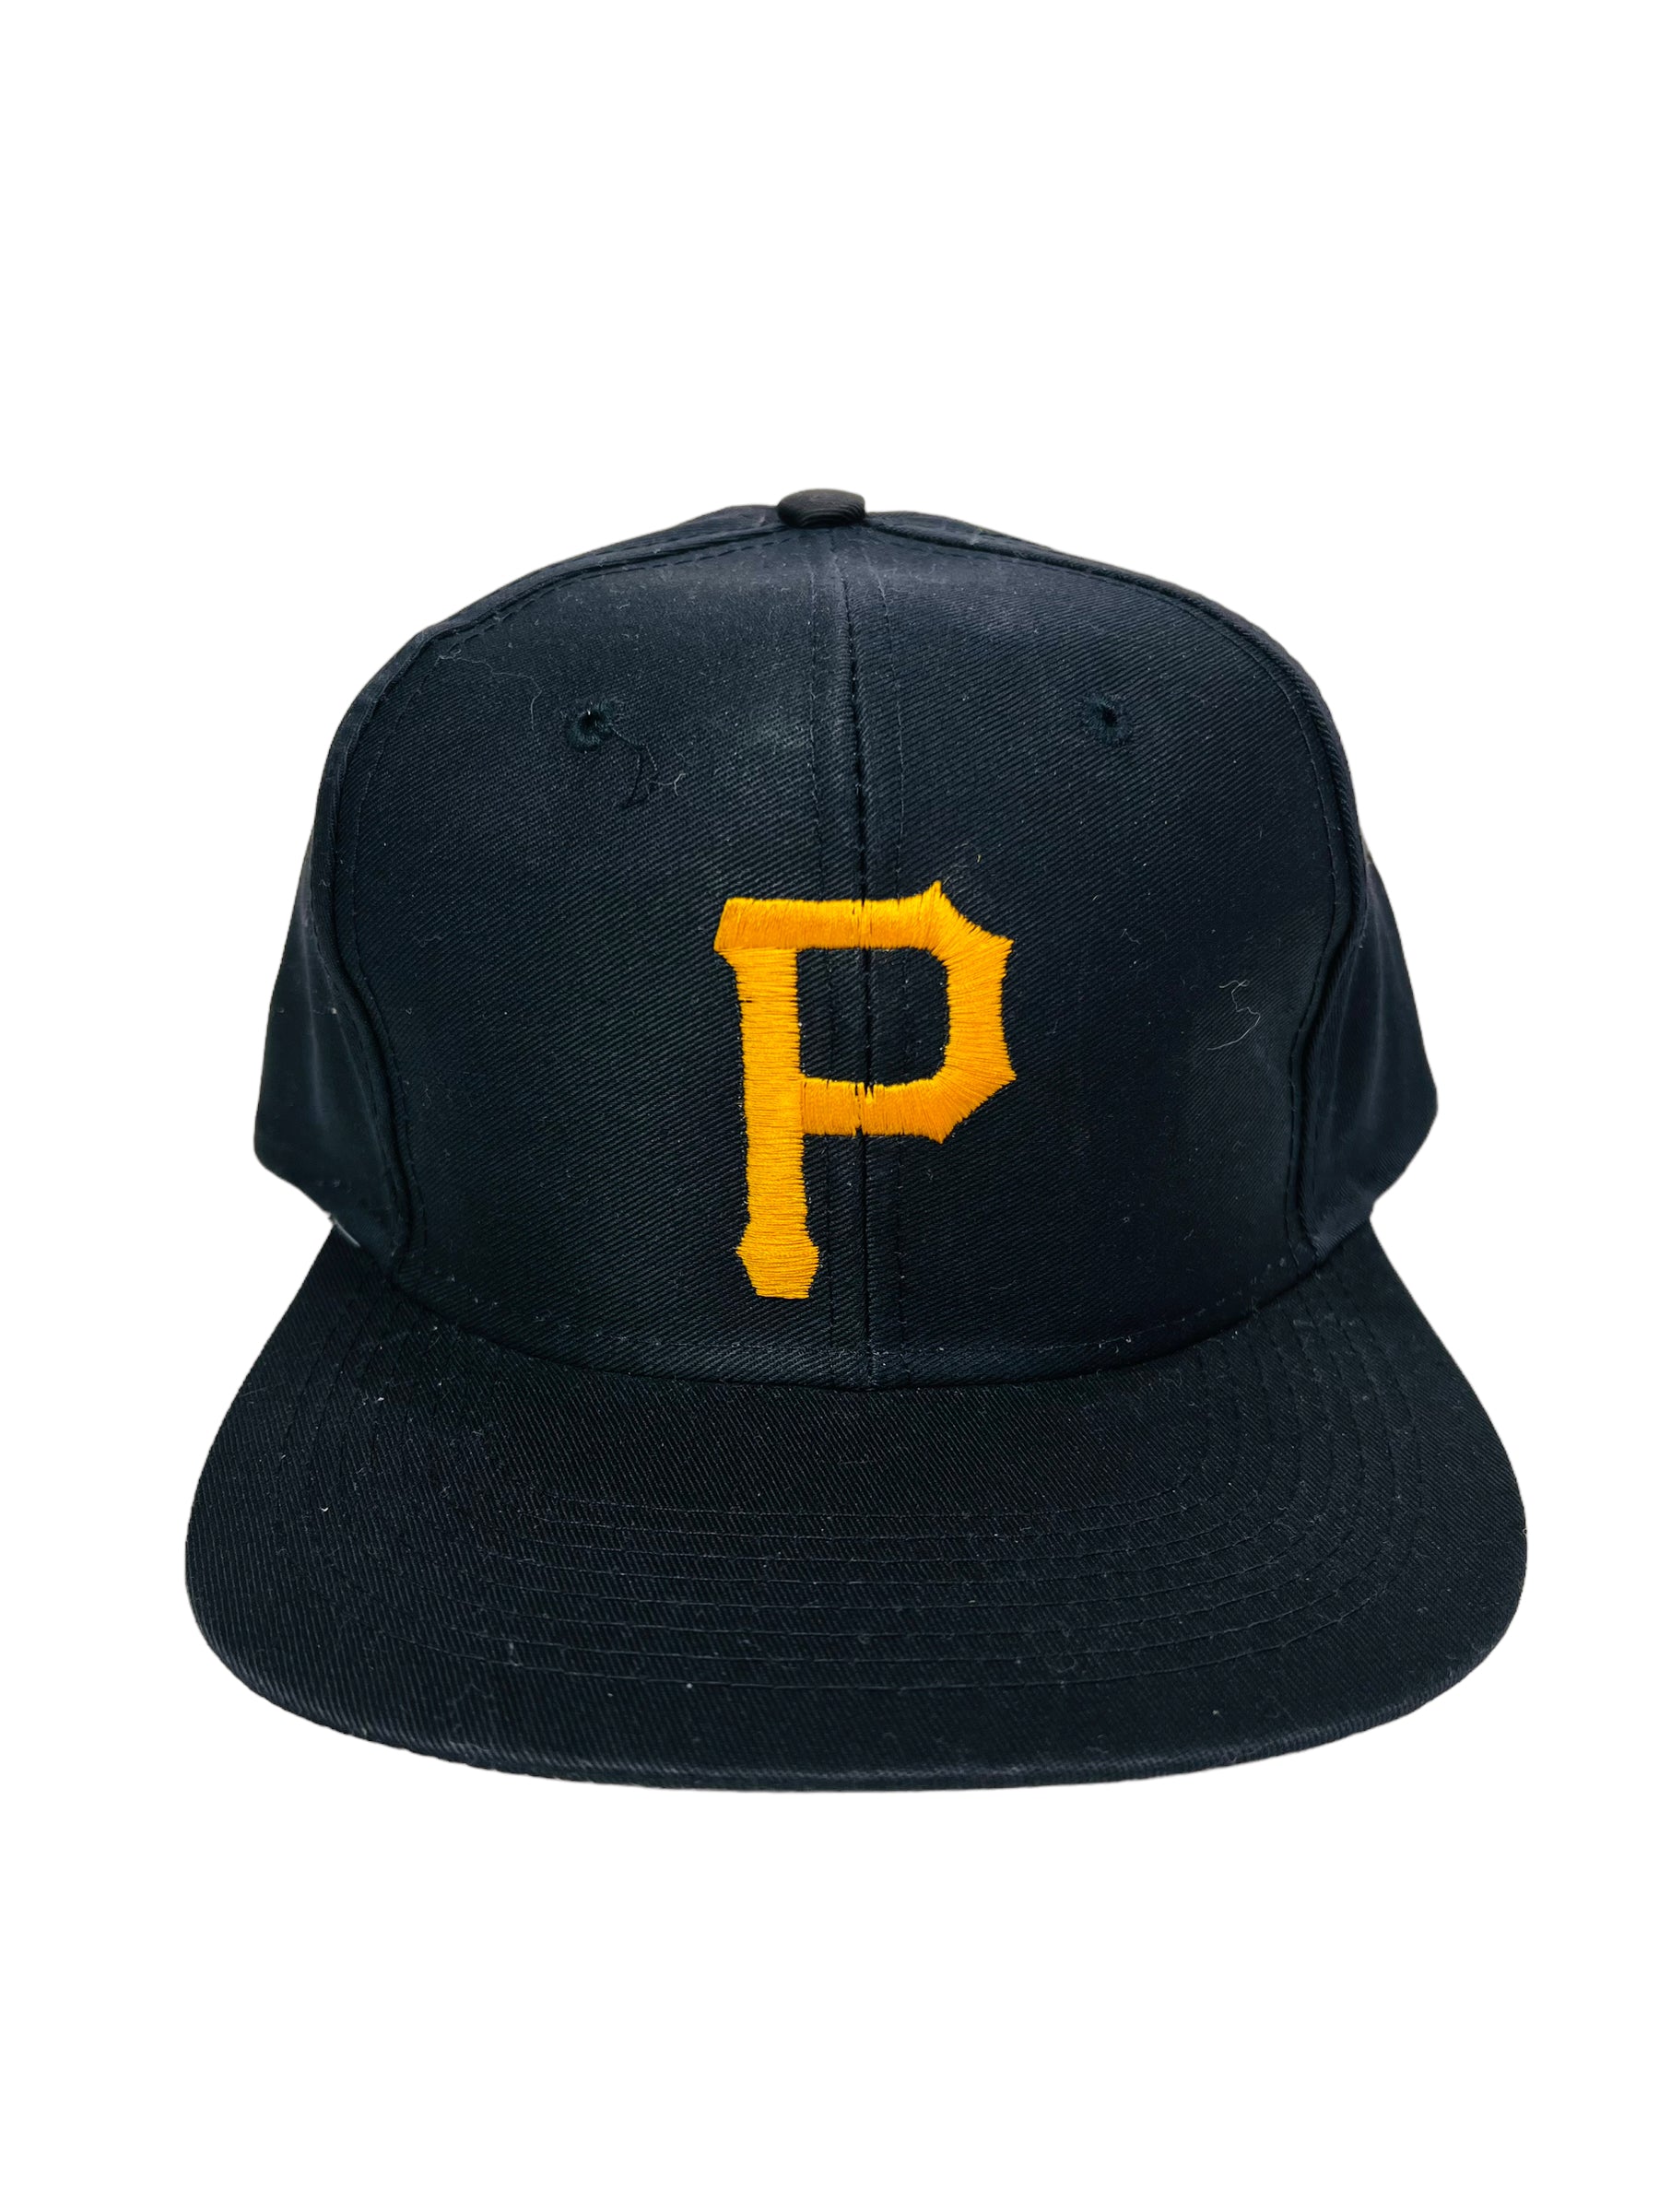 Vintage 1990's Pittsburgh Pirates Outdoor Cap Snapback Hat / Sole Food SF